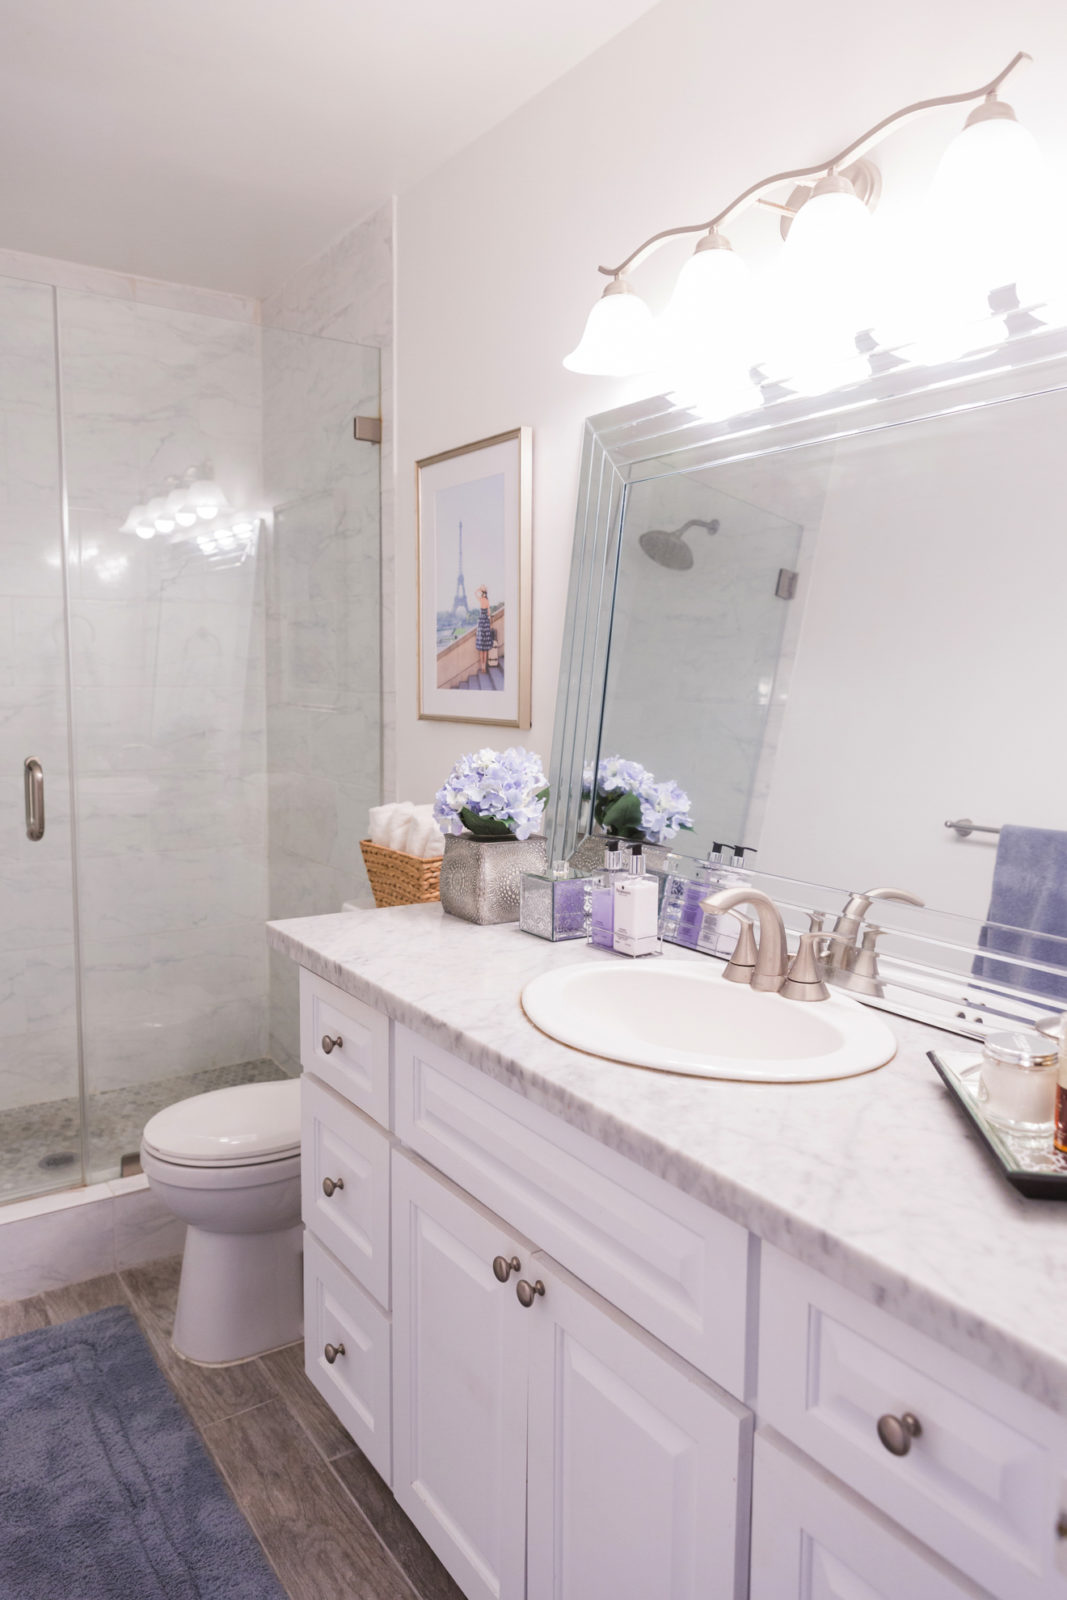 Modern Bathroom Remodel Ideas & Reveal by Home Decor Blogger Laura Lily, White and grey bathroom ideas, bathroom renovation reveal,